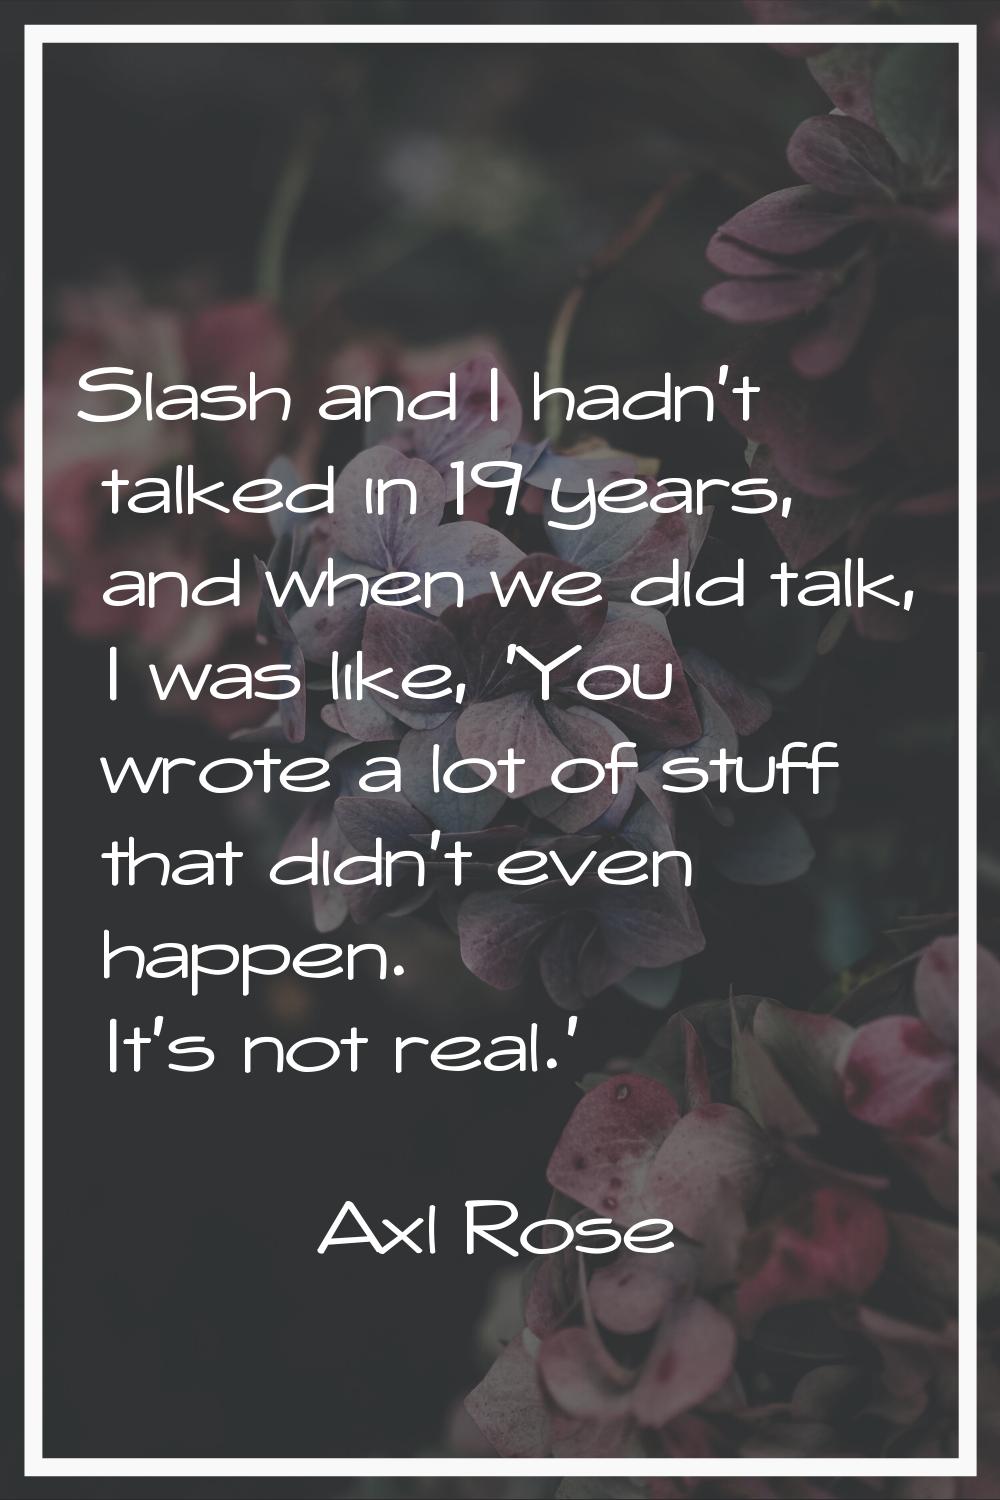 Slash and I hadn't talked in 19 years, and when we did talk, I was like, 'You wrote a lot of stuff 